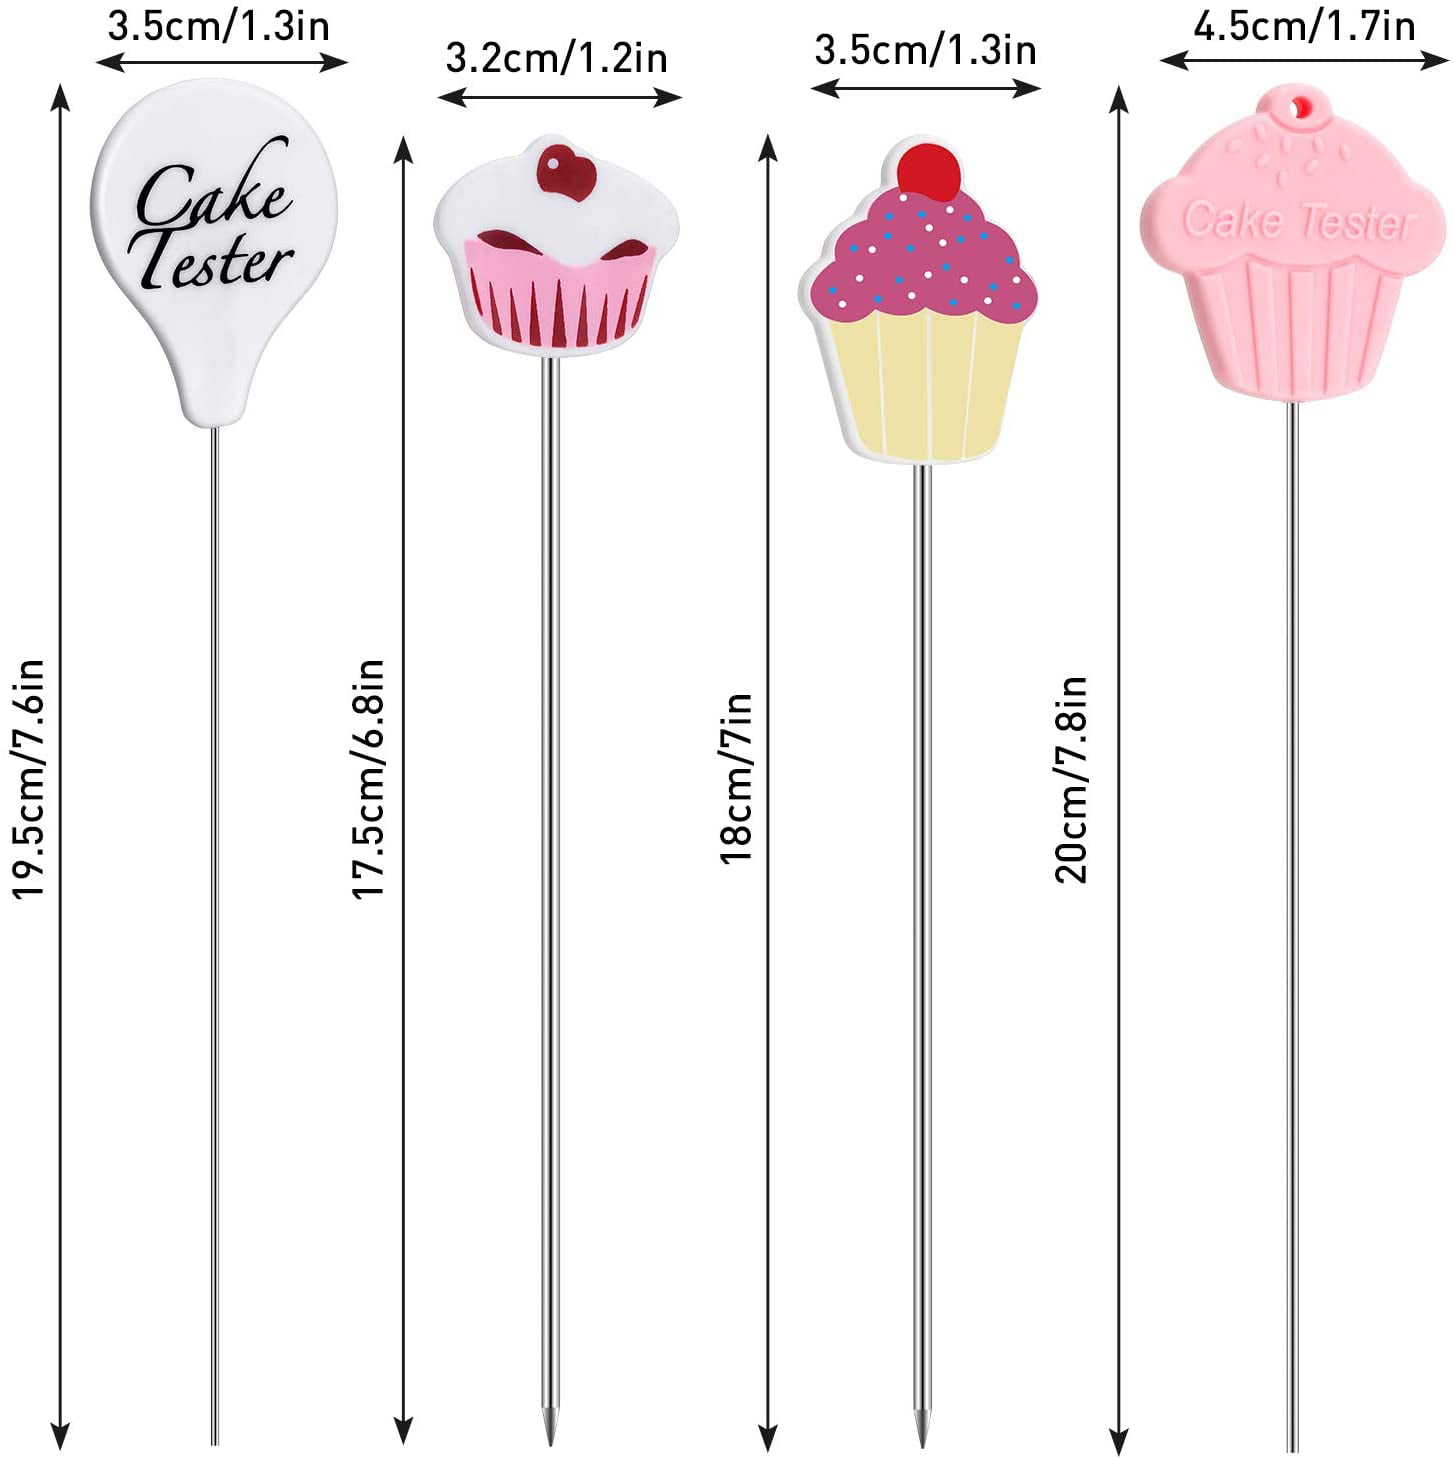 Urijk Kitchen Baking Cake Tester Stainless Steel Cake Testing Needles for Cake Bread Pastry Biscuit Cookie #1，1pcs 